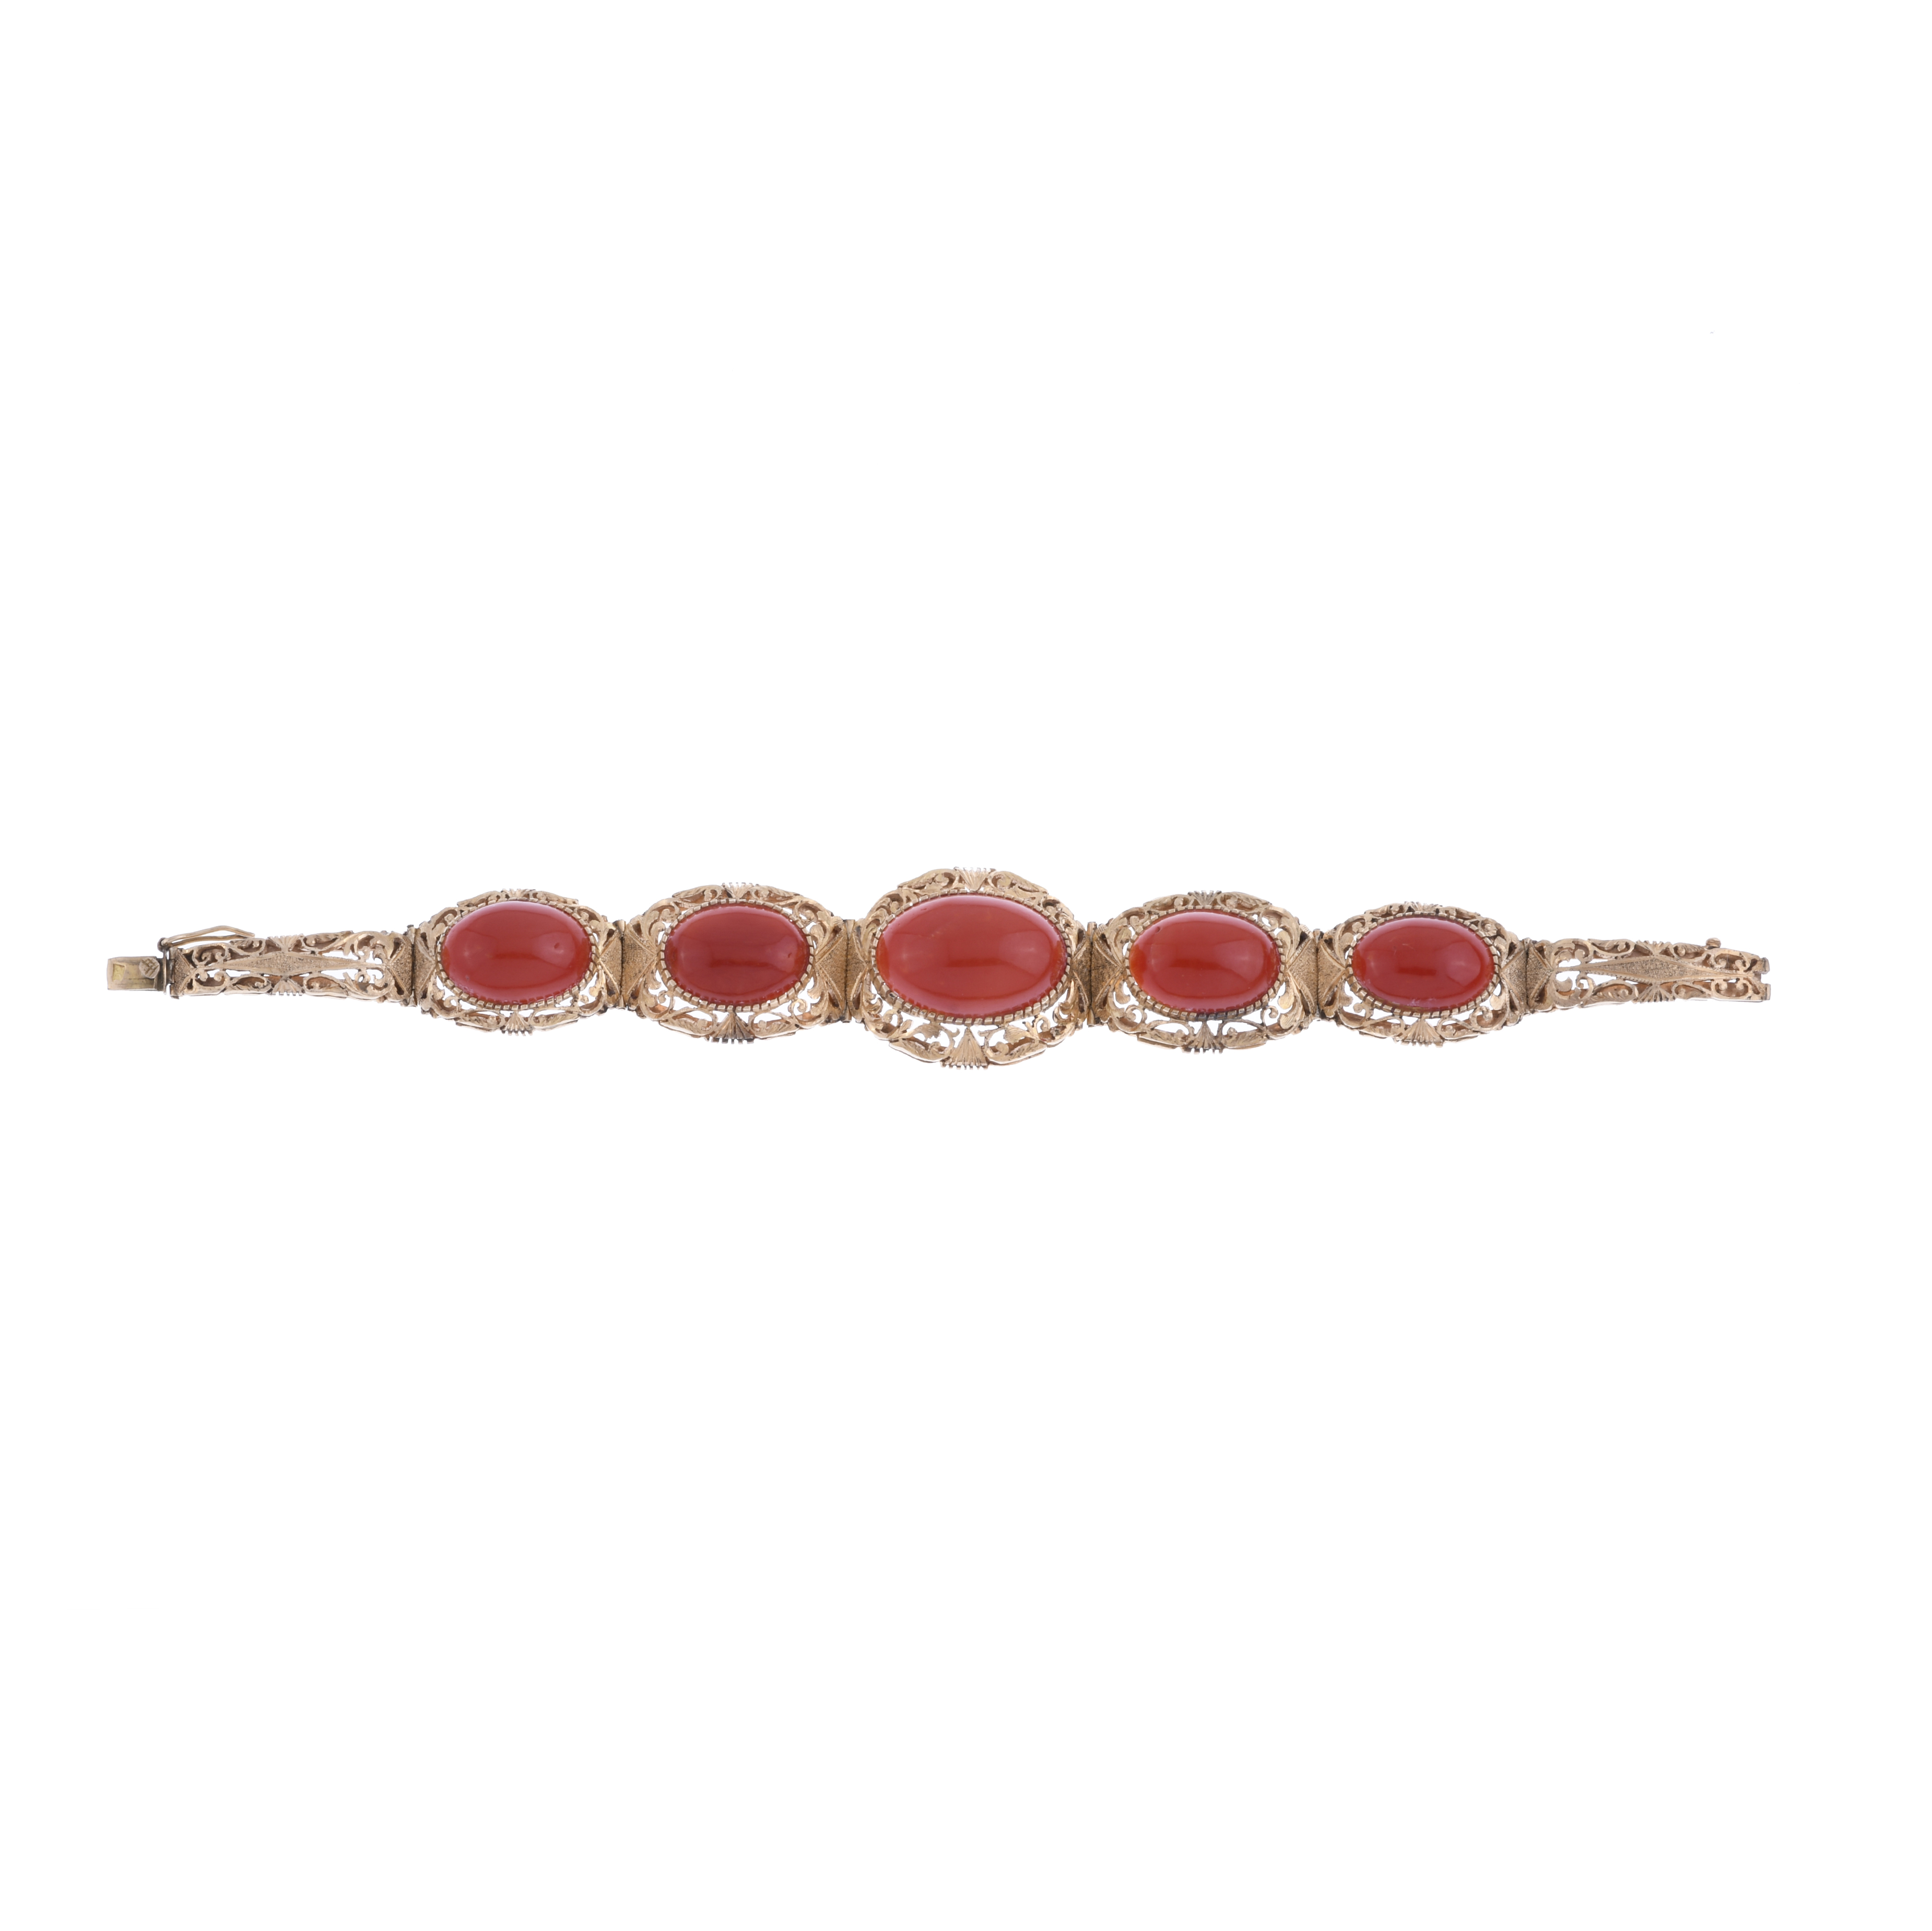 BRACELET WITH CORAL.